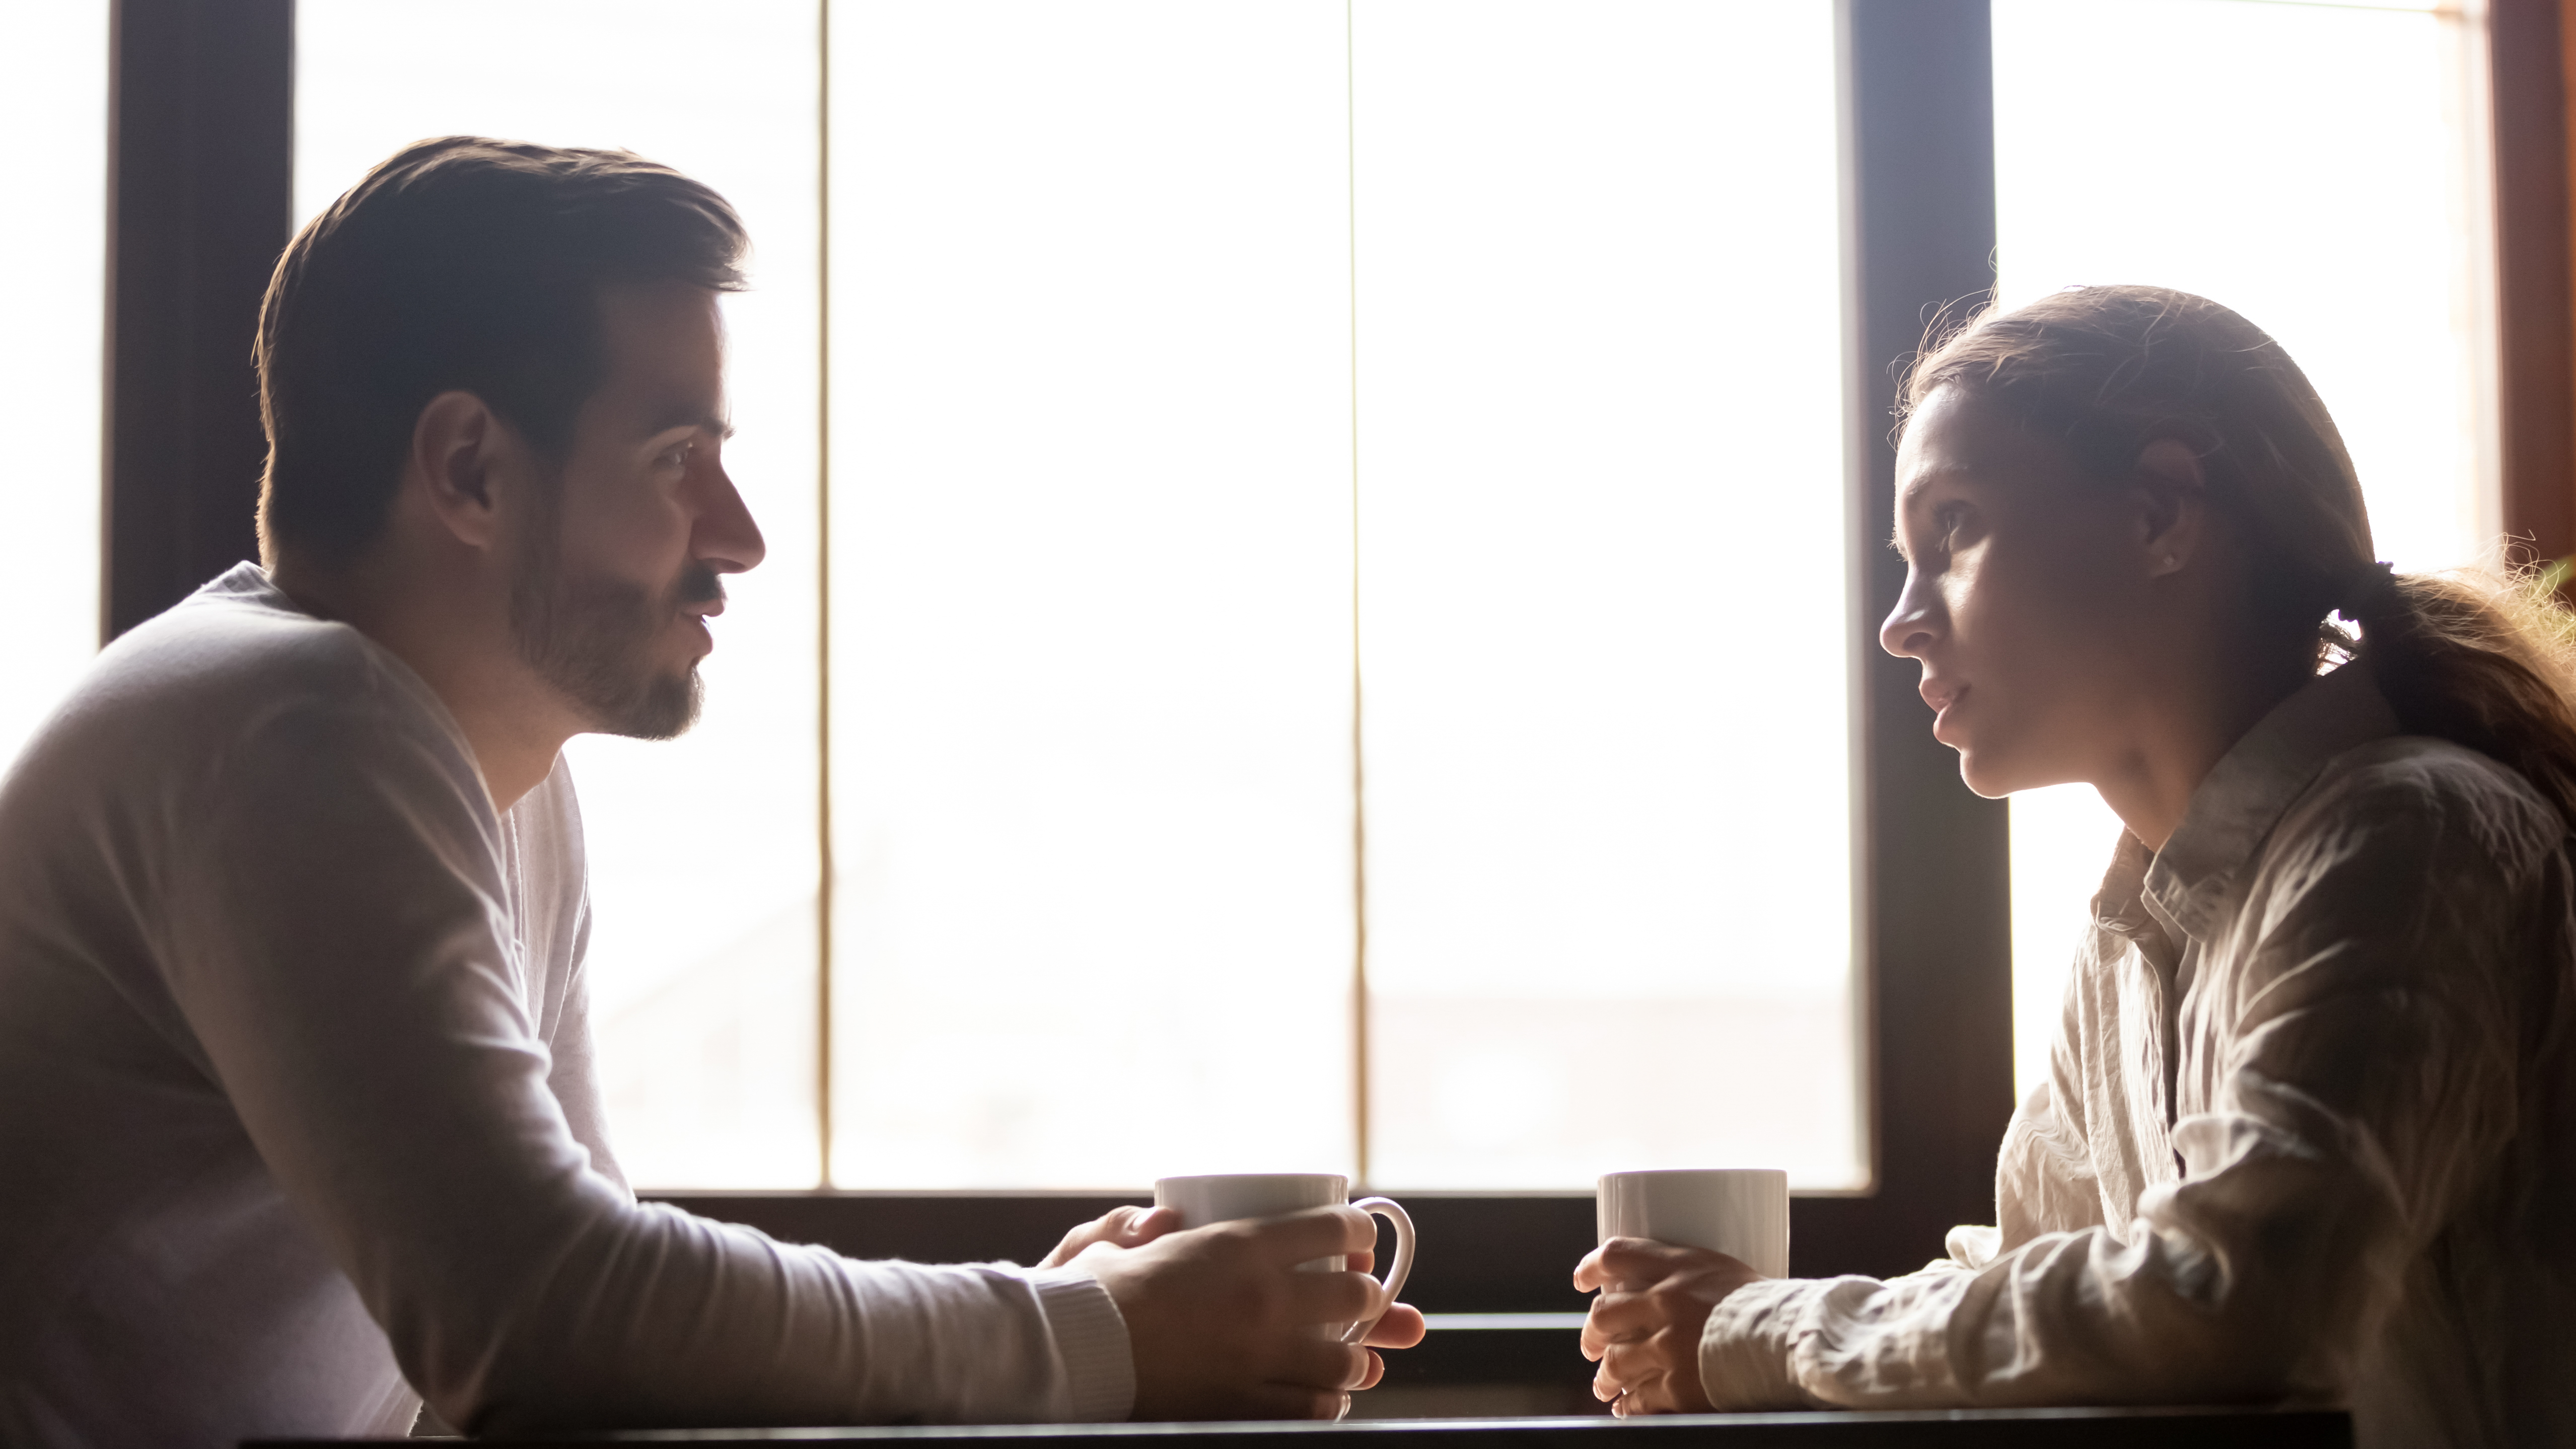 A man and a woman having a serious discussion | Source: Shutterstock